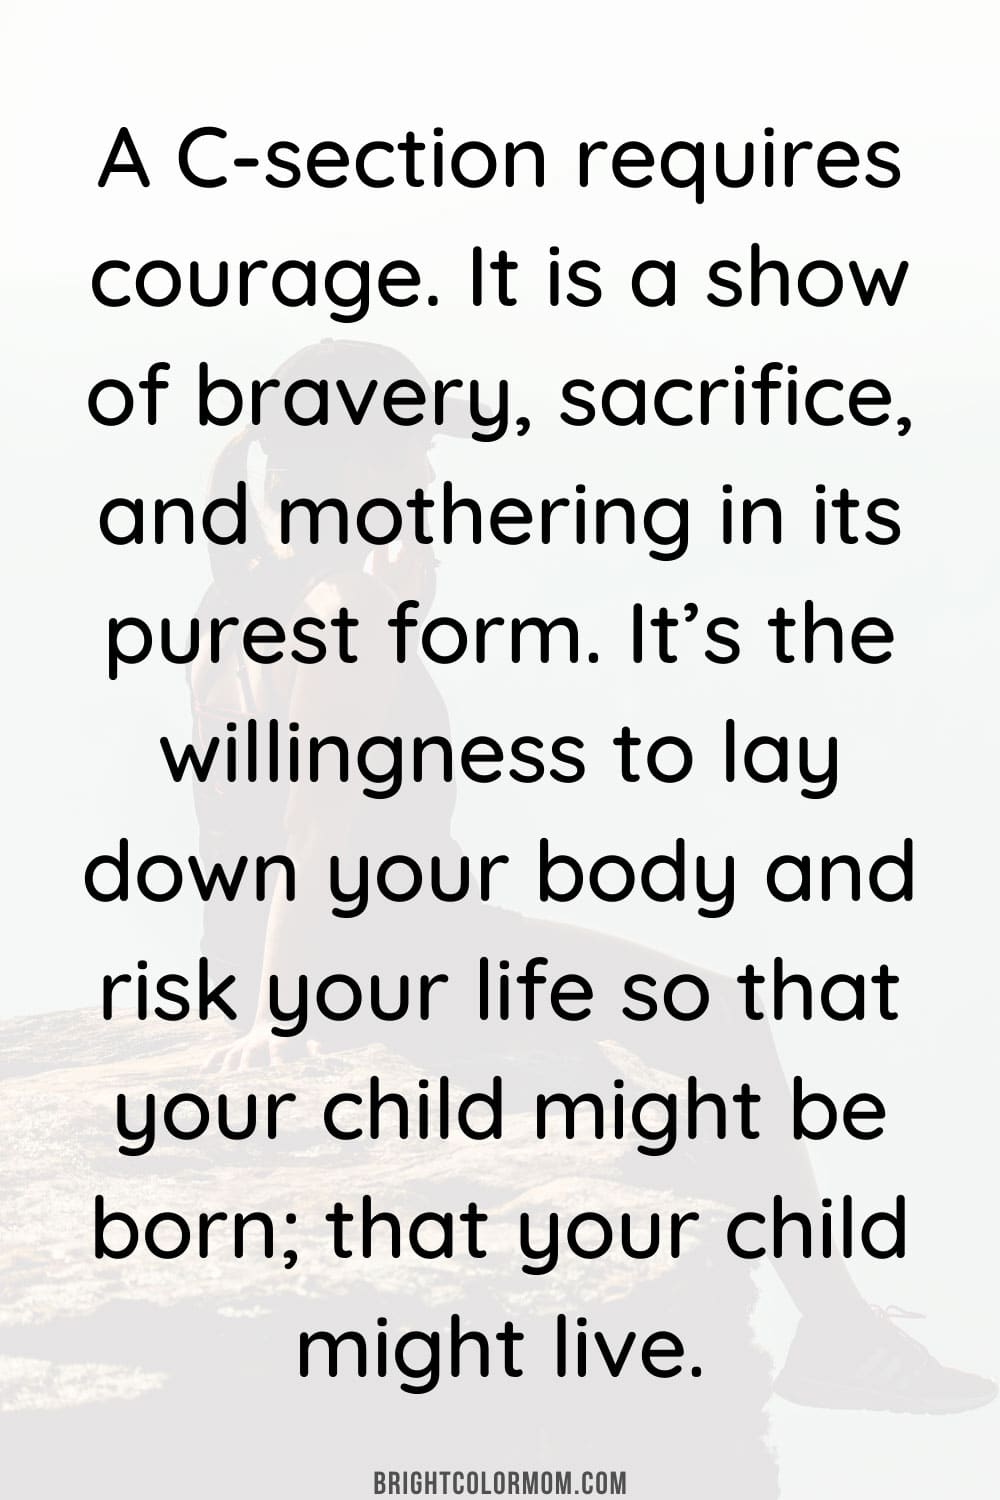 A C-section requires courage. It is a show of bravery, sacrifice, and mothering in its purest form. It’s the willingness to lay down your body and risk your life so that your child might be born; that your child might live.